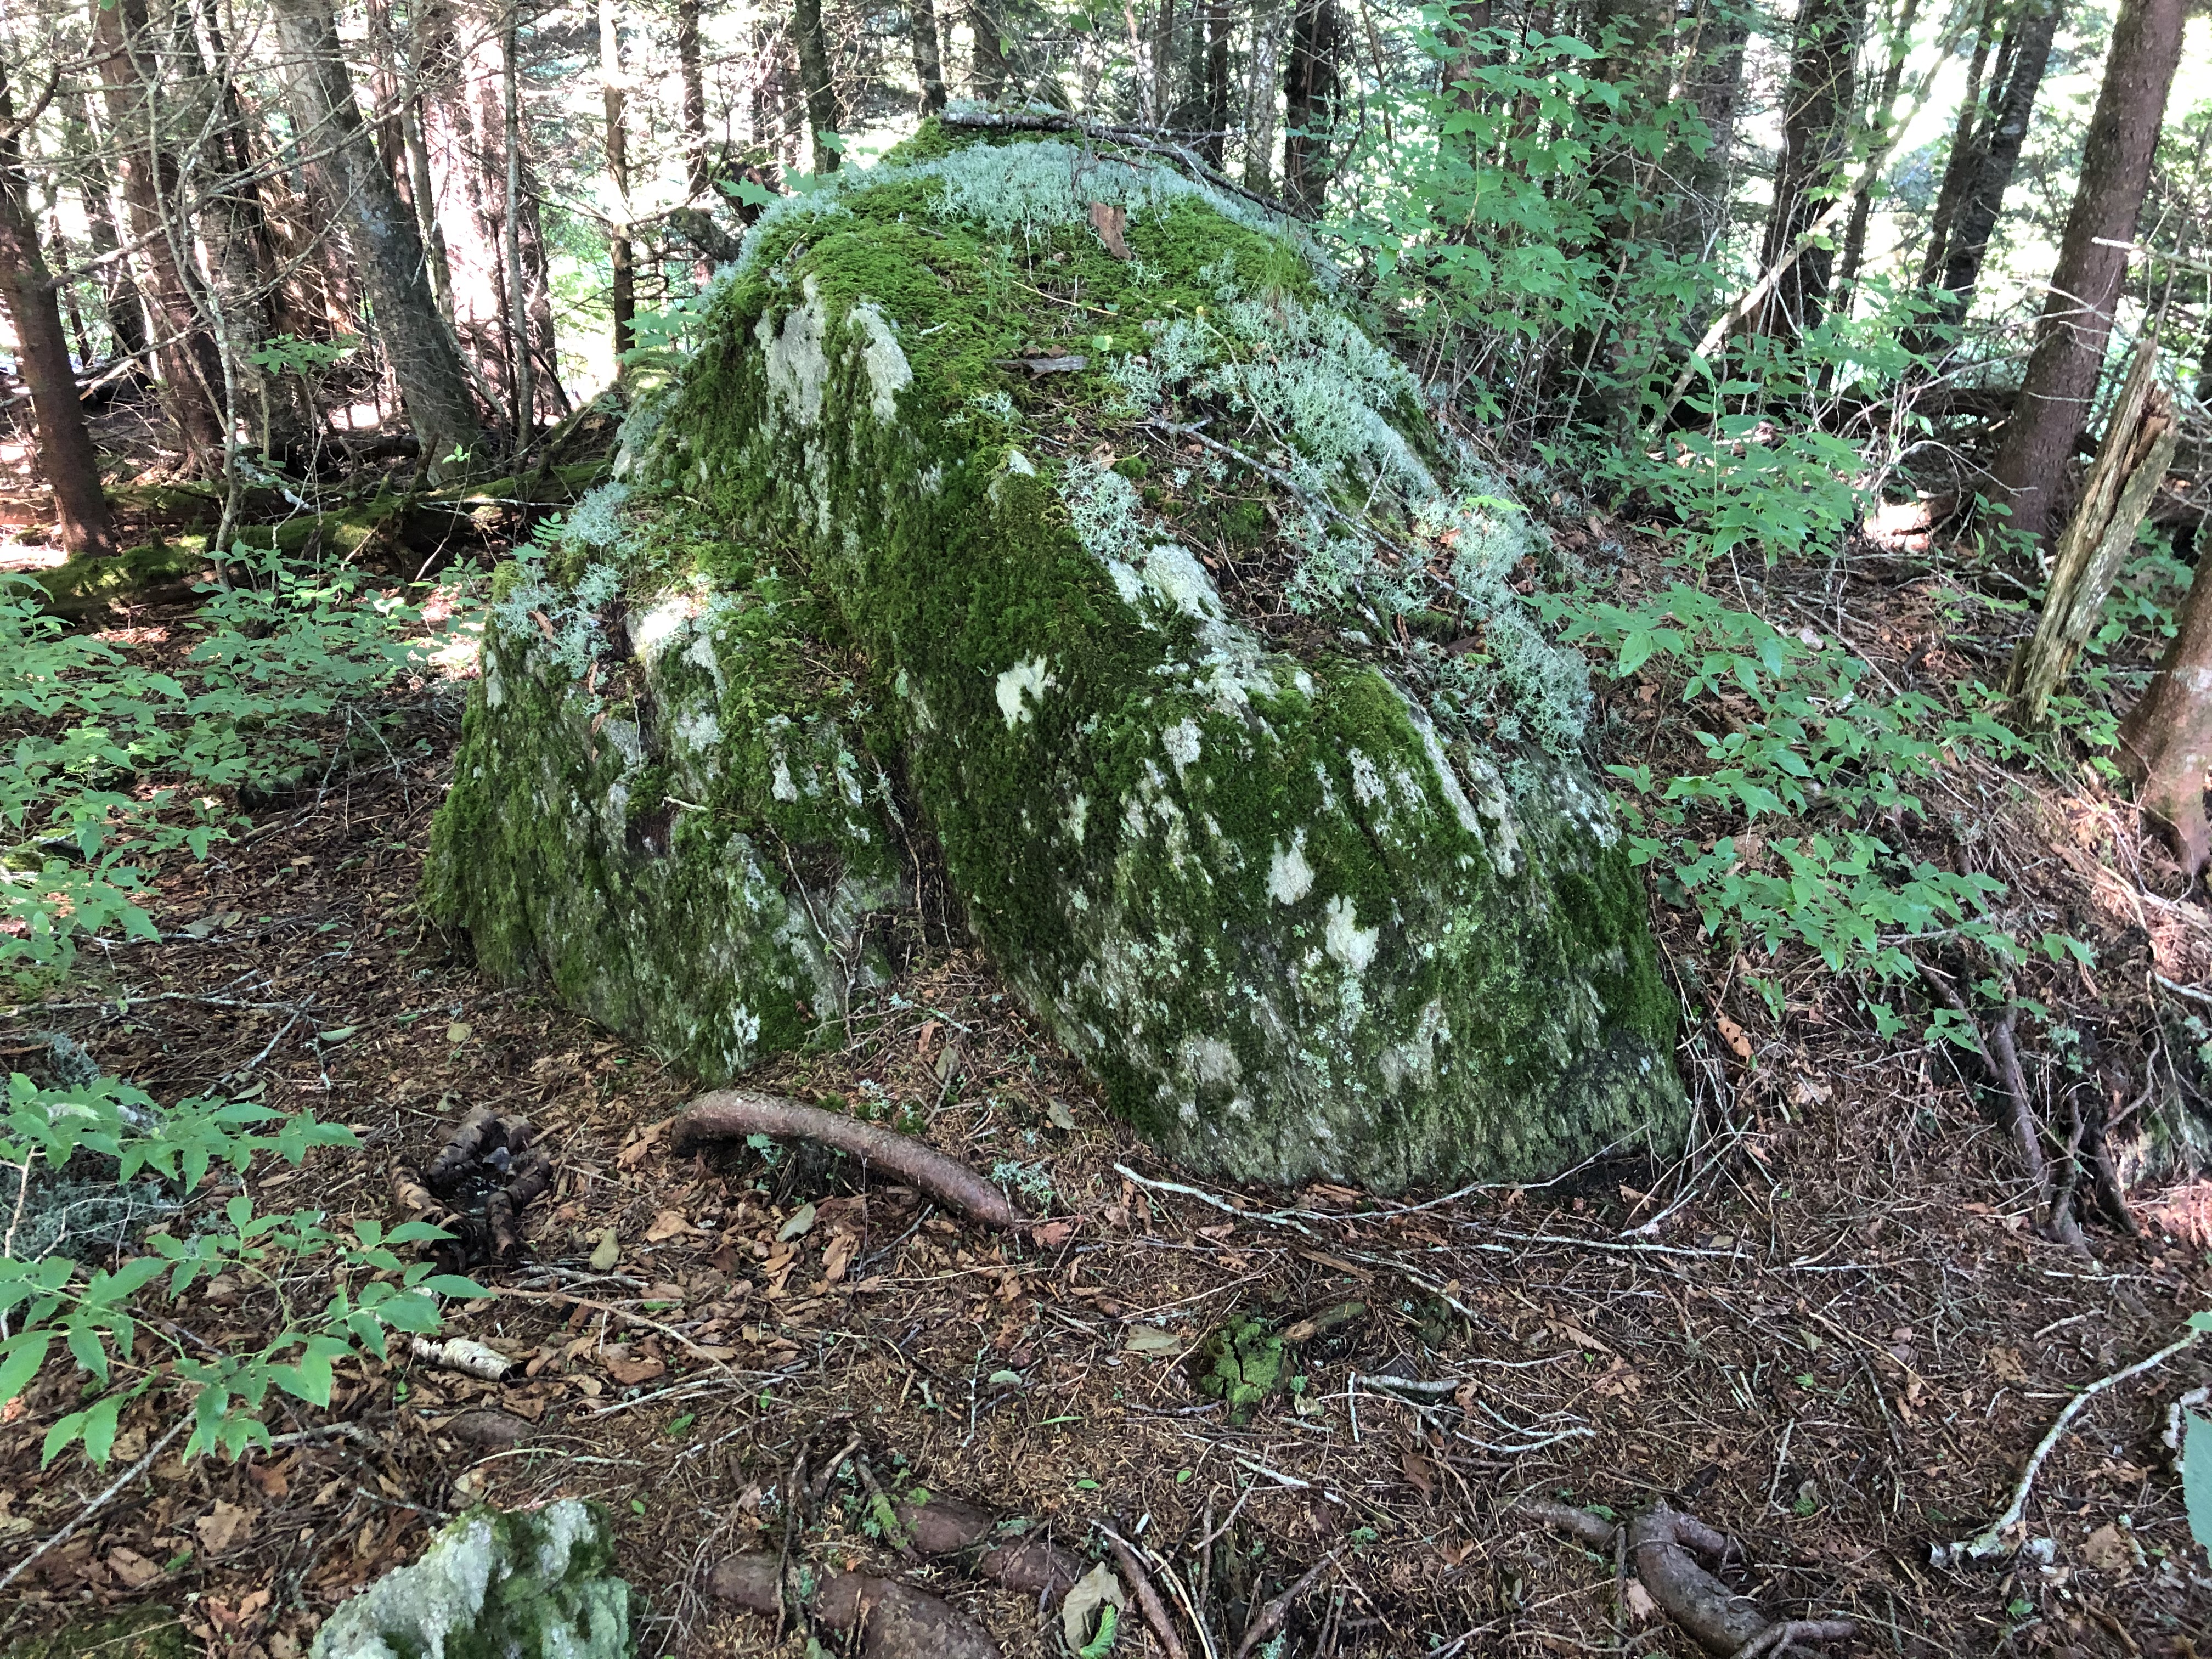 Balsam firs dominate the forest. Shaded rock outcroppings sit on the forest floor made soft by a bed of pine needles and moss.